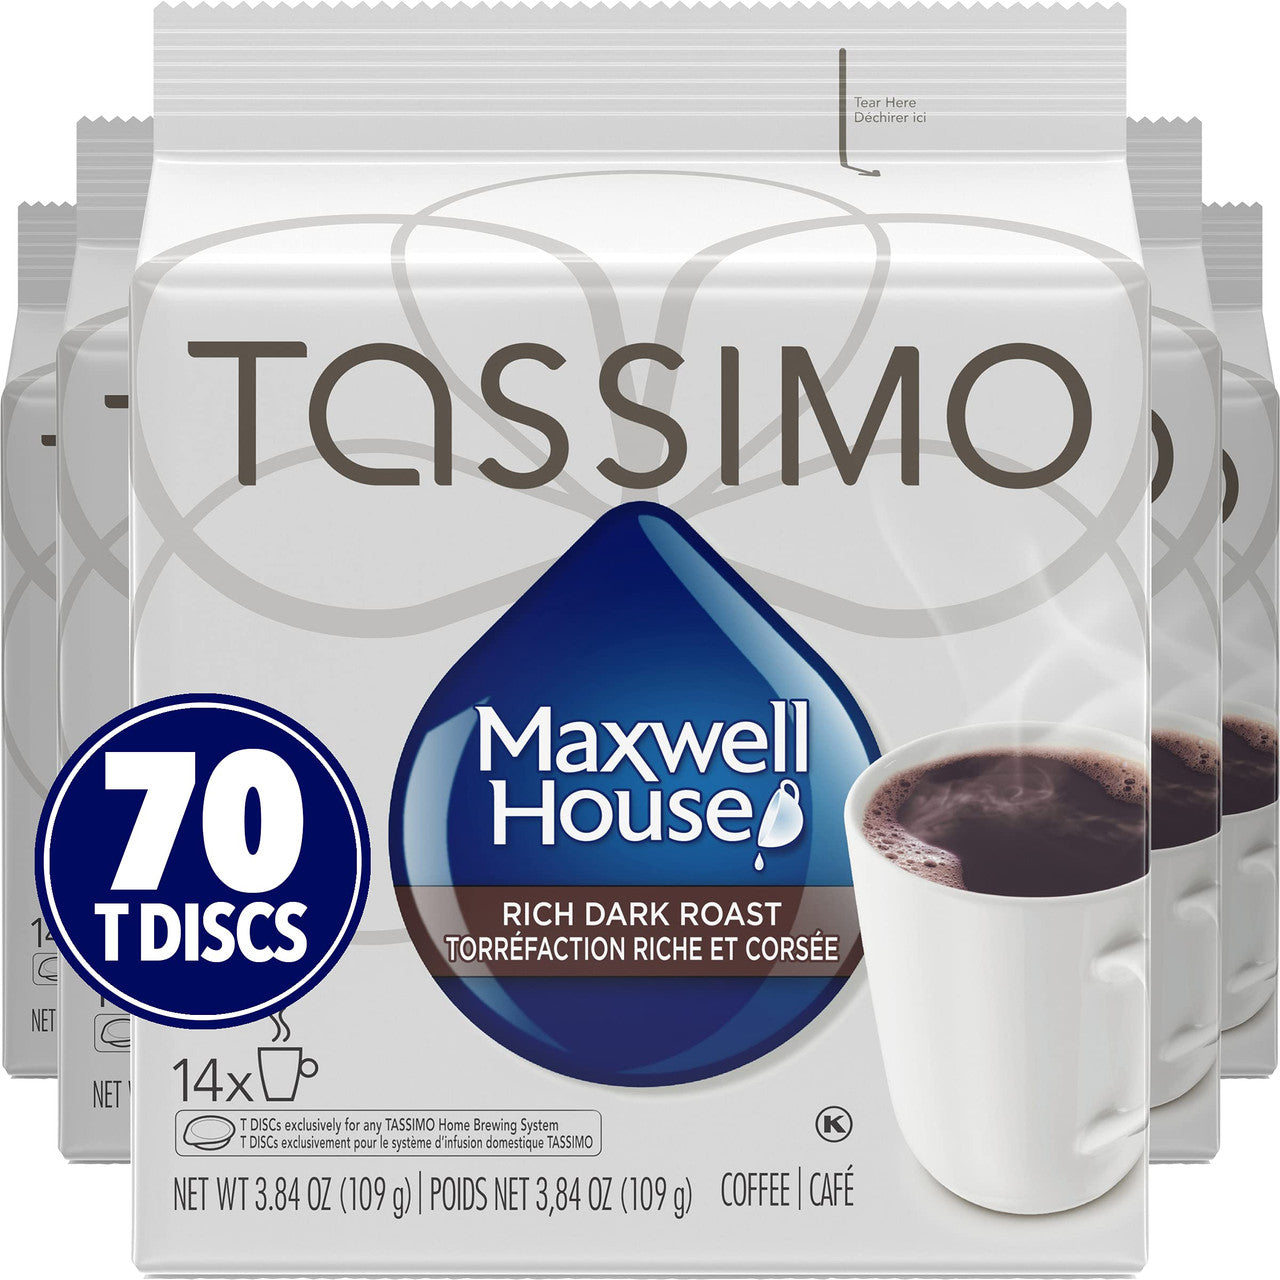 Tassimo Maxwell House Dark Roast Coffee, 70 T-Discs (5 Boxes of 14 T-Discs) {Imported from Canada}